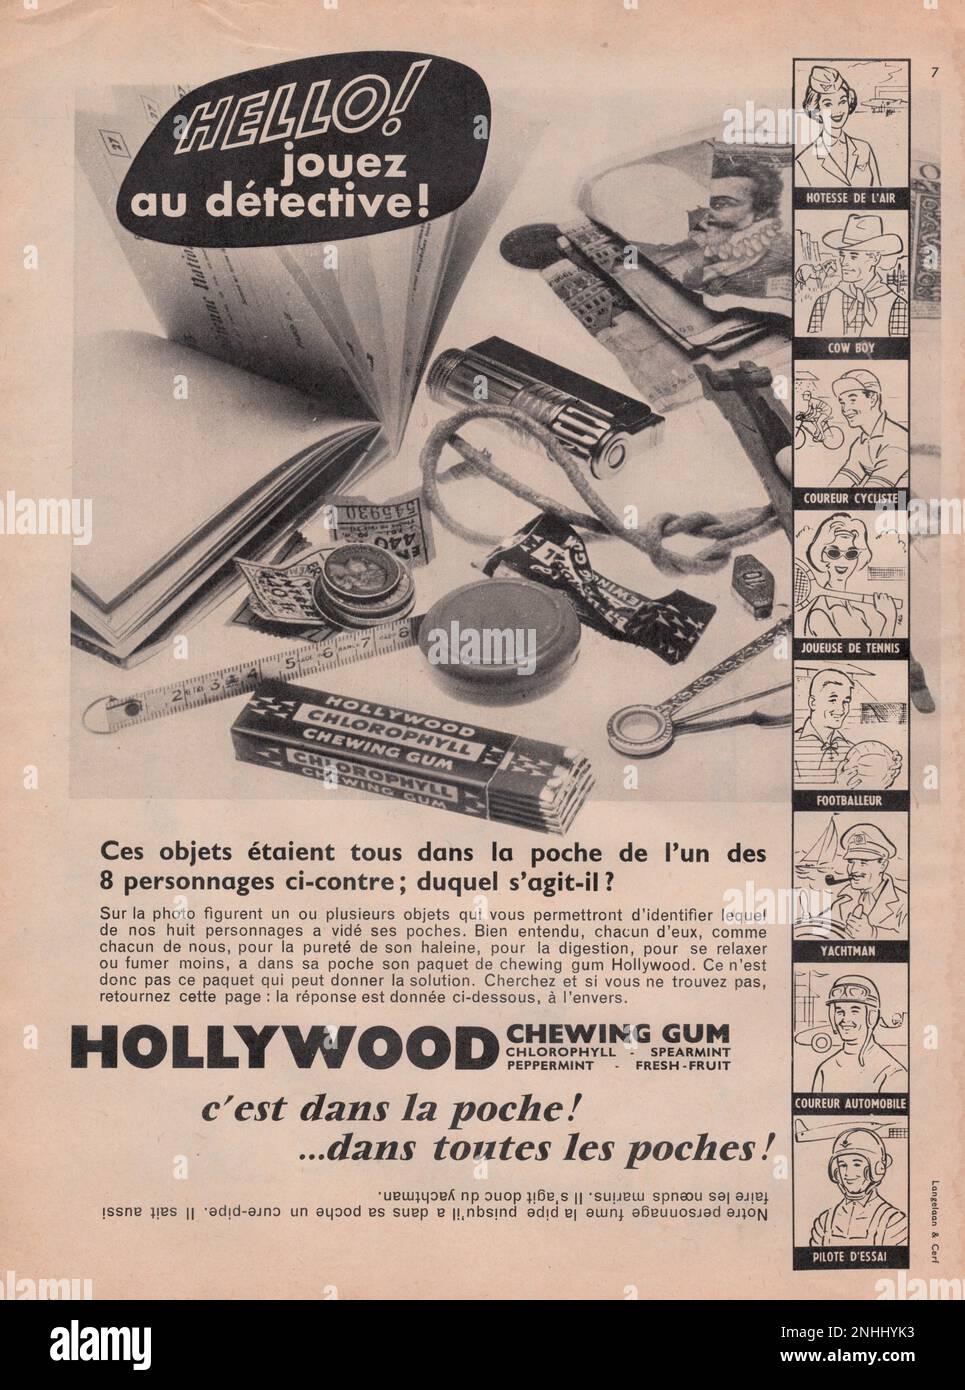 French commercial of Hollywood chewing gum Hollywood chewing gum vintage French magazine advertisement, 1959, old Hollywood chewing gum advert Stock Photo